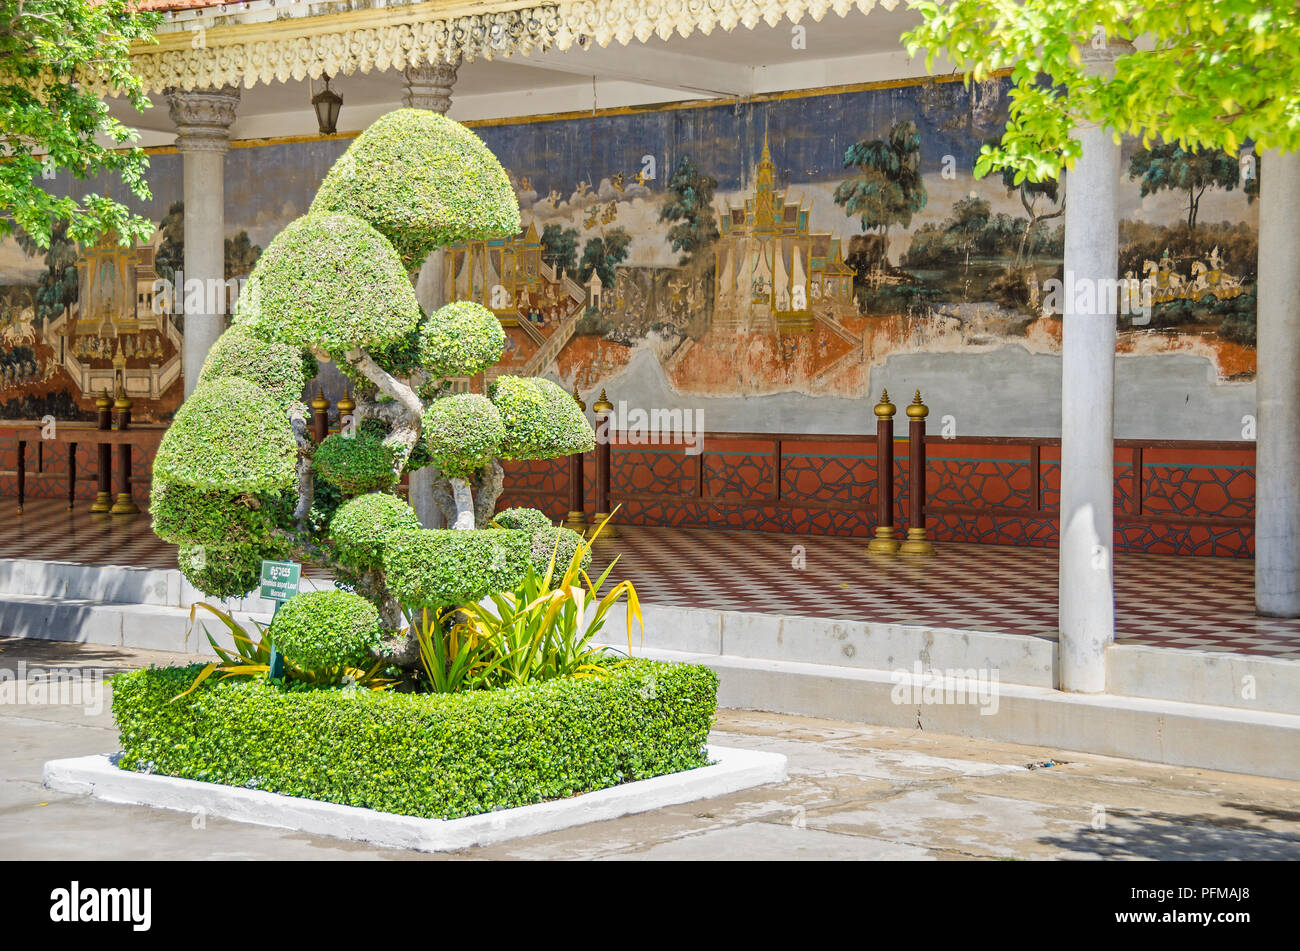 Phnom Penh, Cambodia - April 8, 2018: Reamker fresco murals of the Open-Air-Pavillon or Reamker gallery in a compound of The Silver Pagoda with a scis Stock Photo